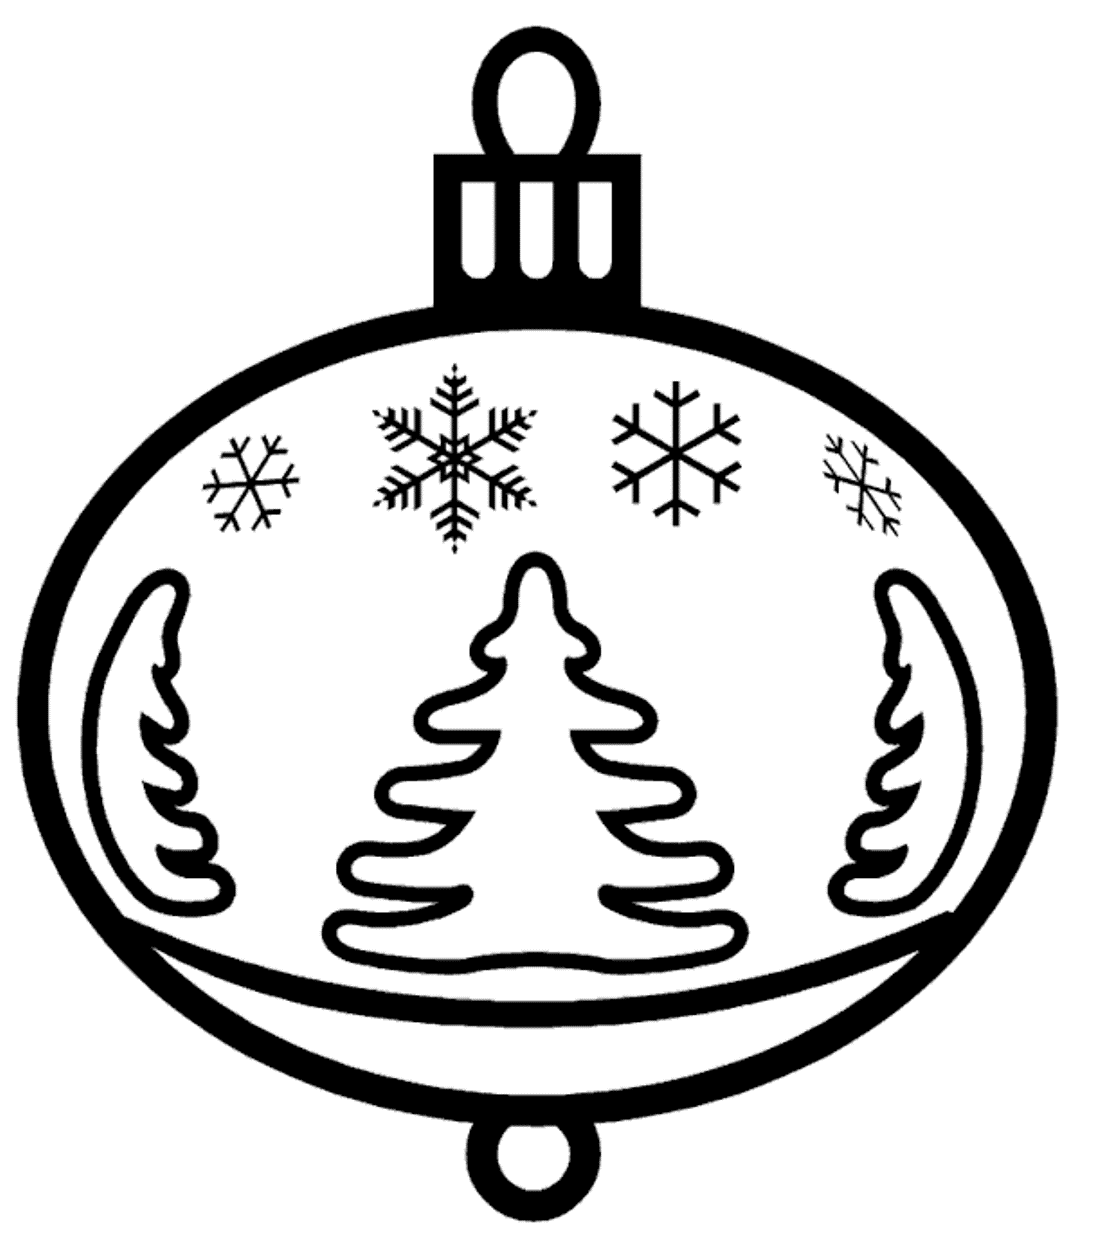 Christmas Coloring Page Ornament | Christmas Coloring pages of ...